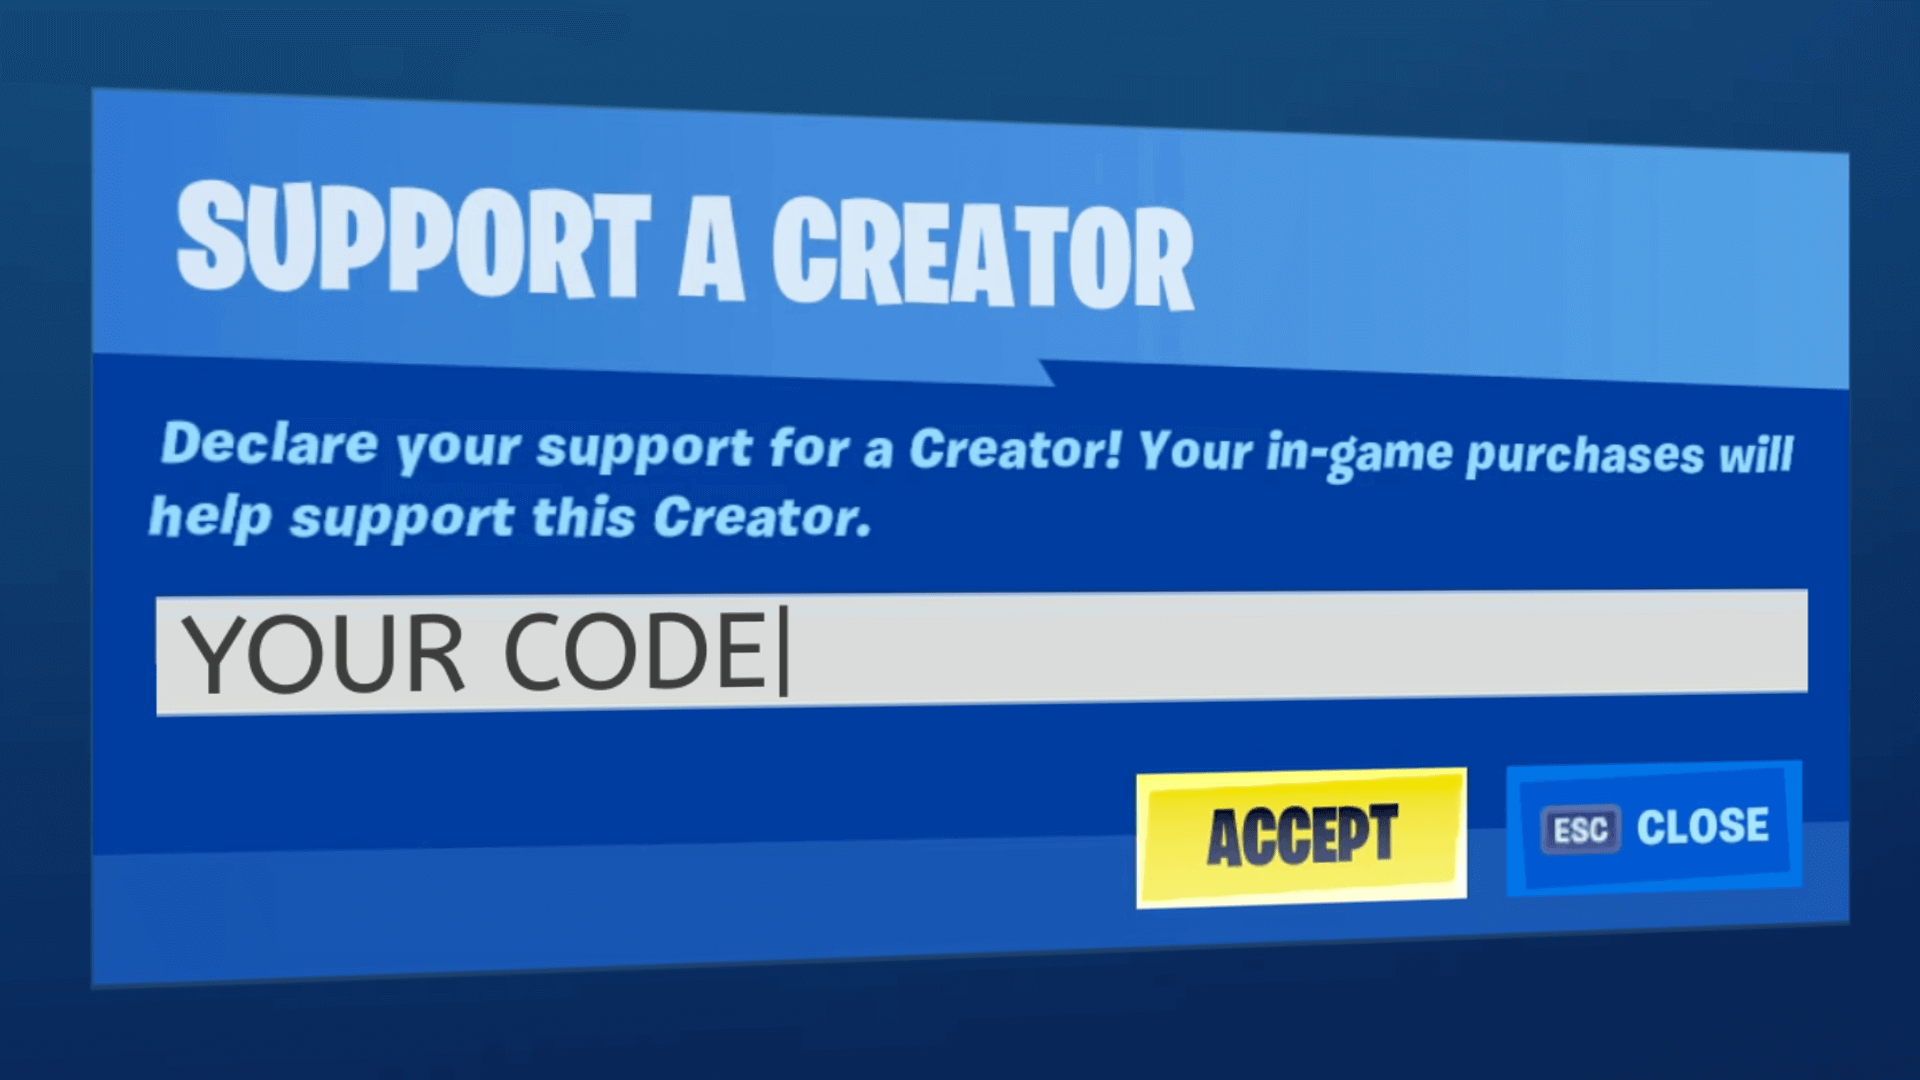 Fortnite: How to get a support a creator code without 1,000 followers